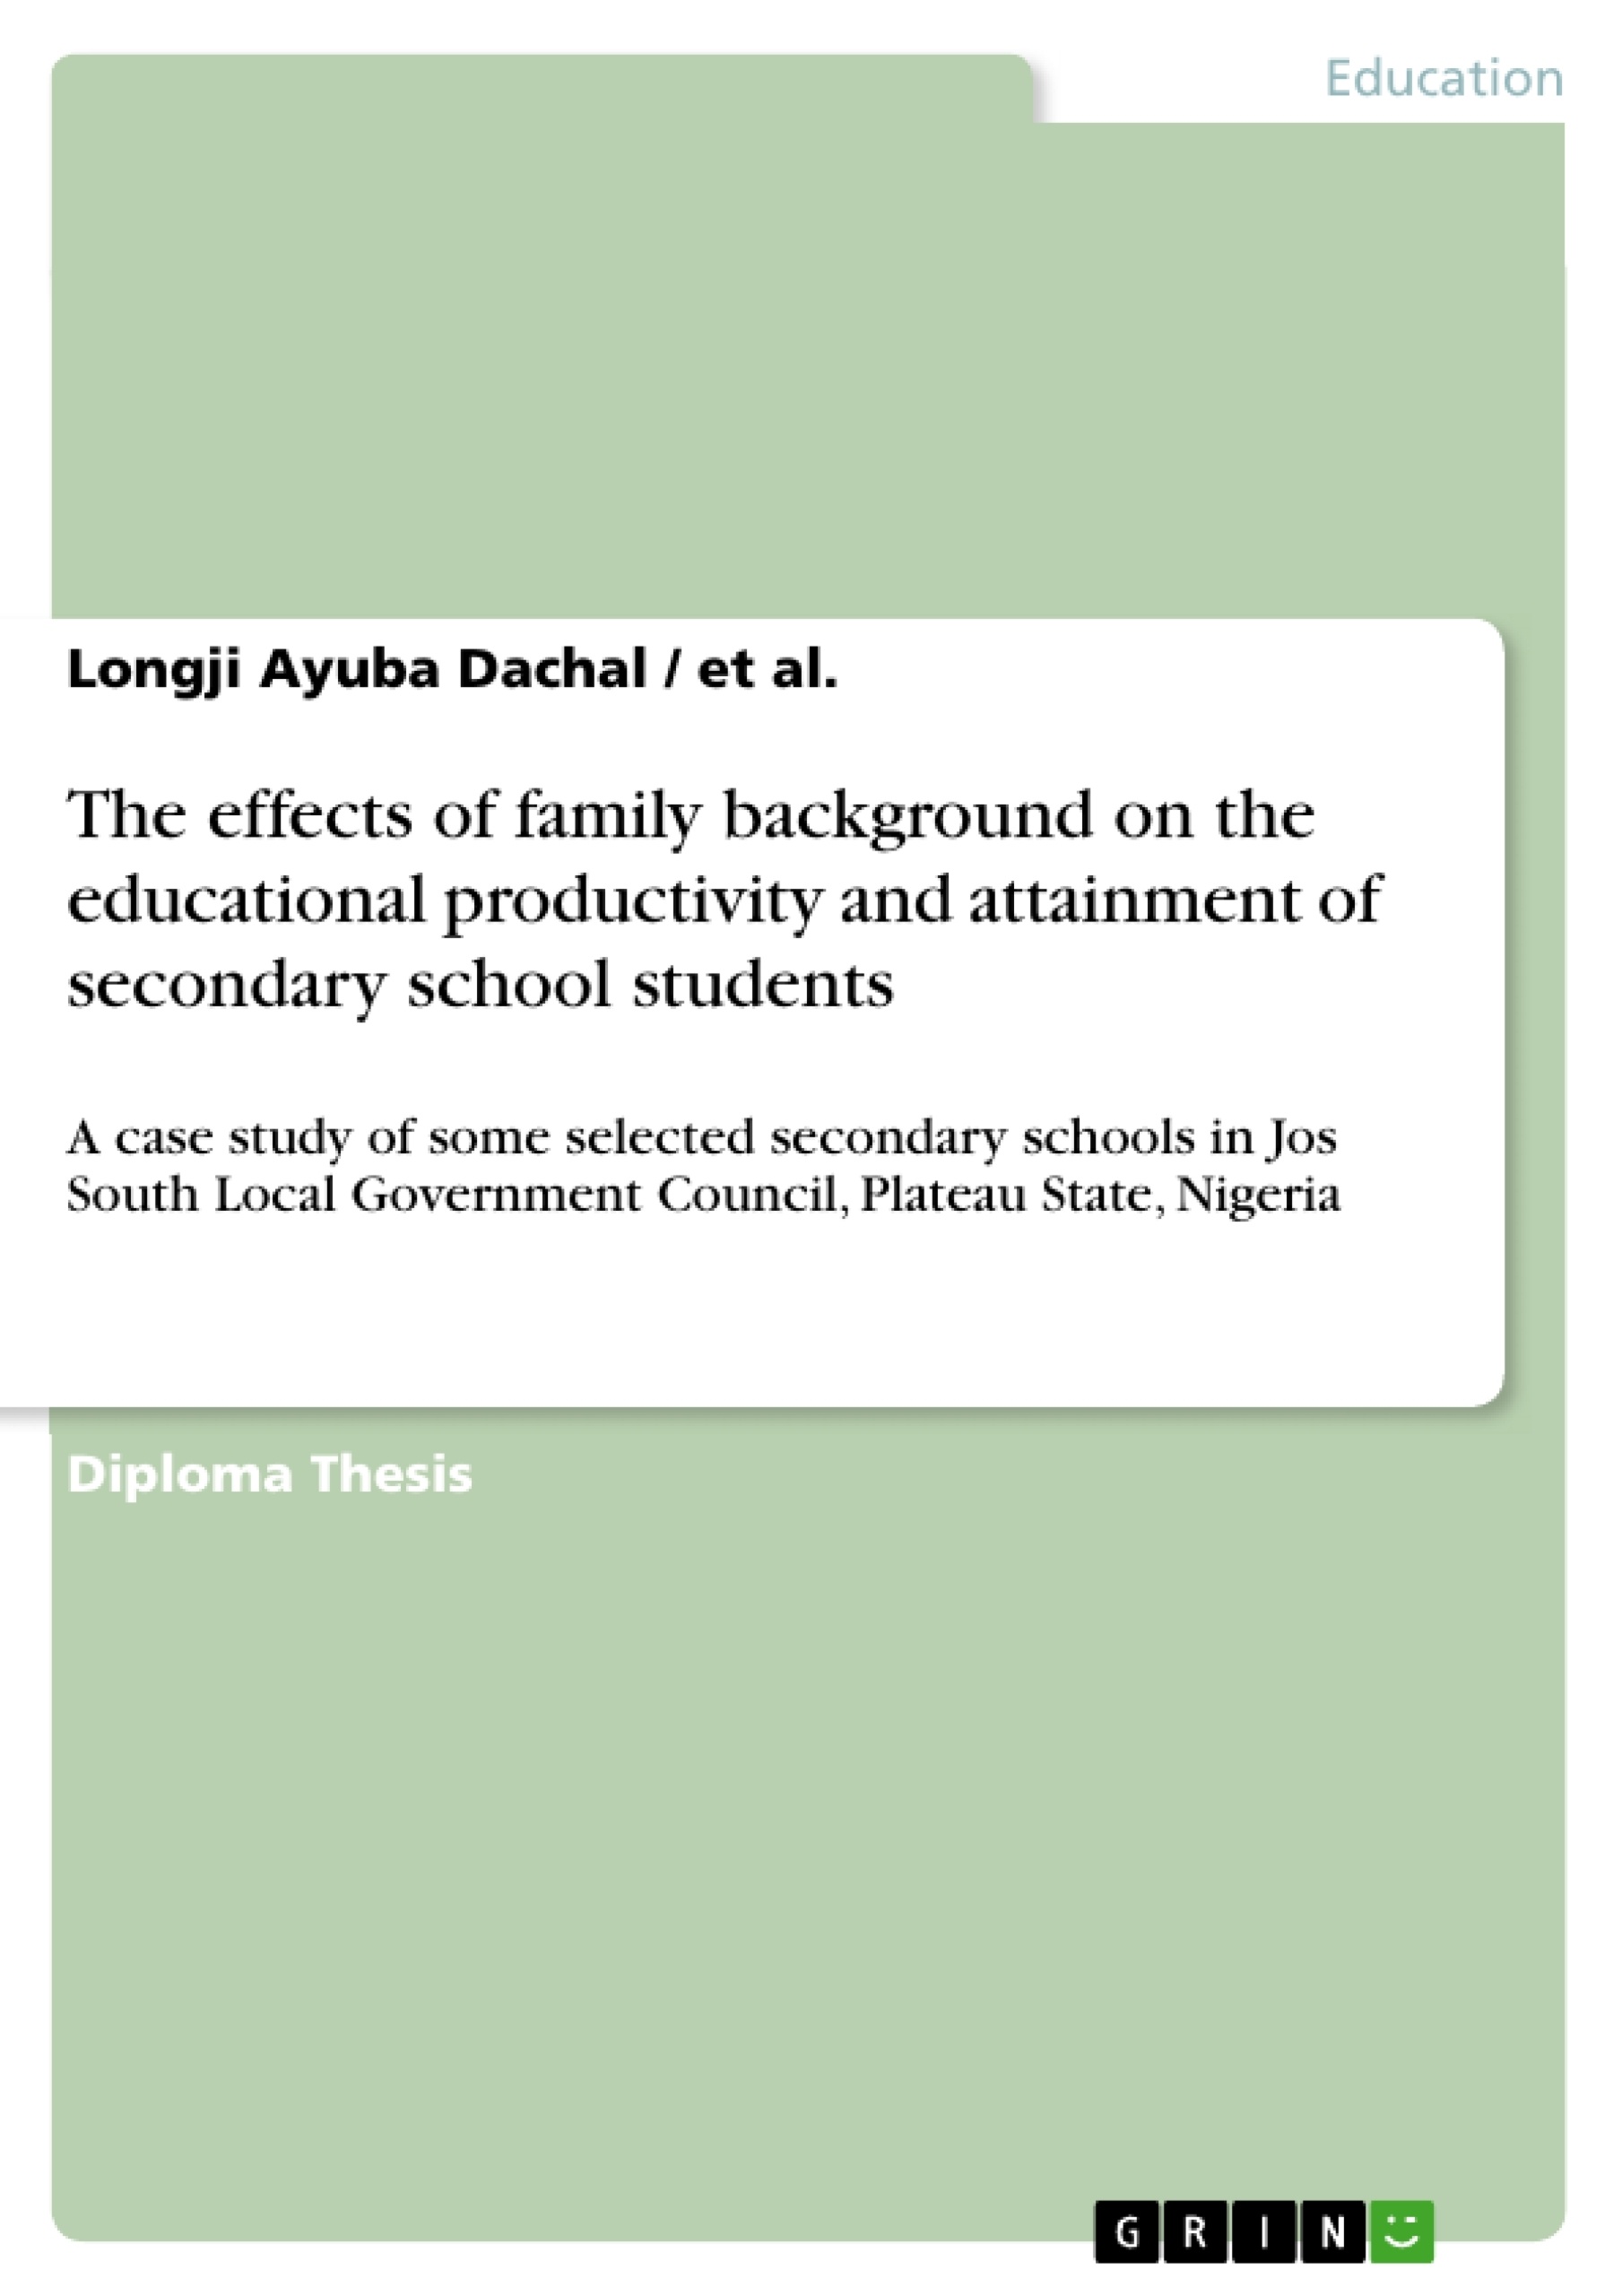 Title: The effects of family background on the educational productivity and attainment of secondary school students